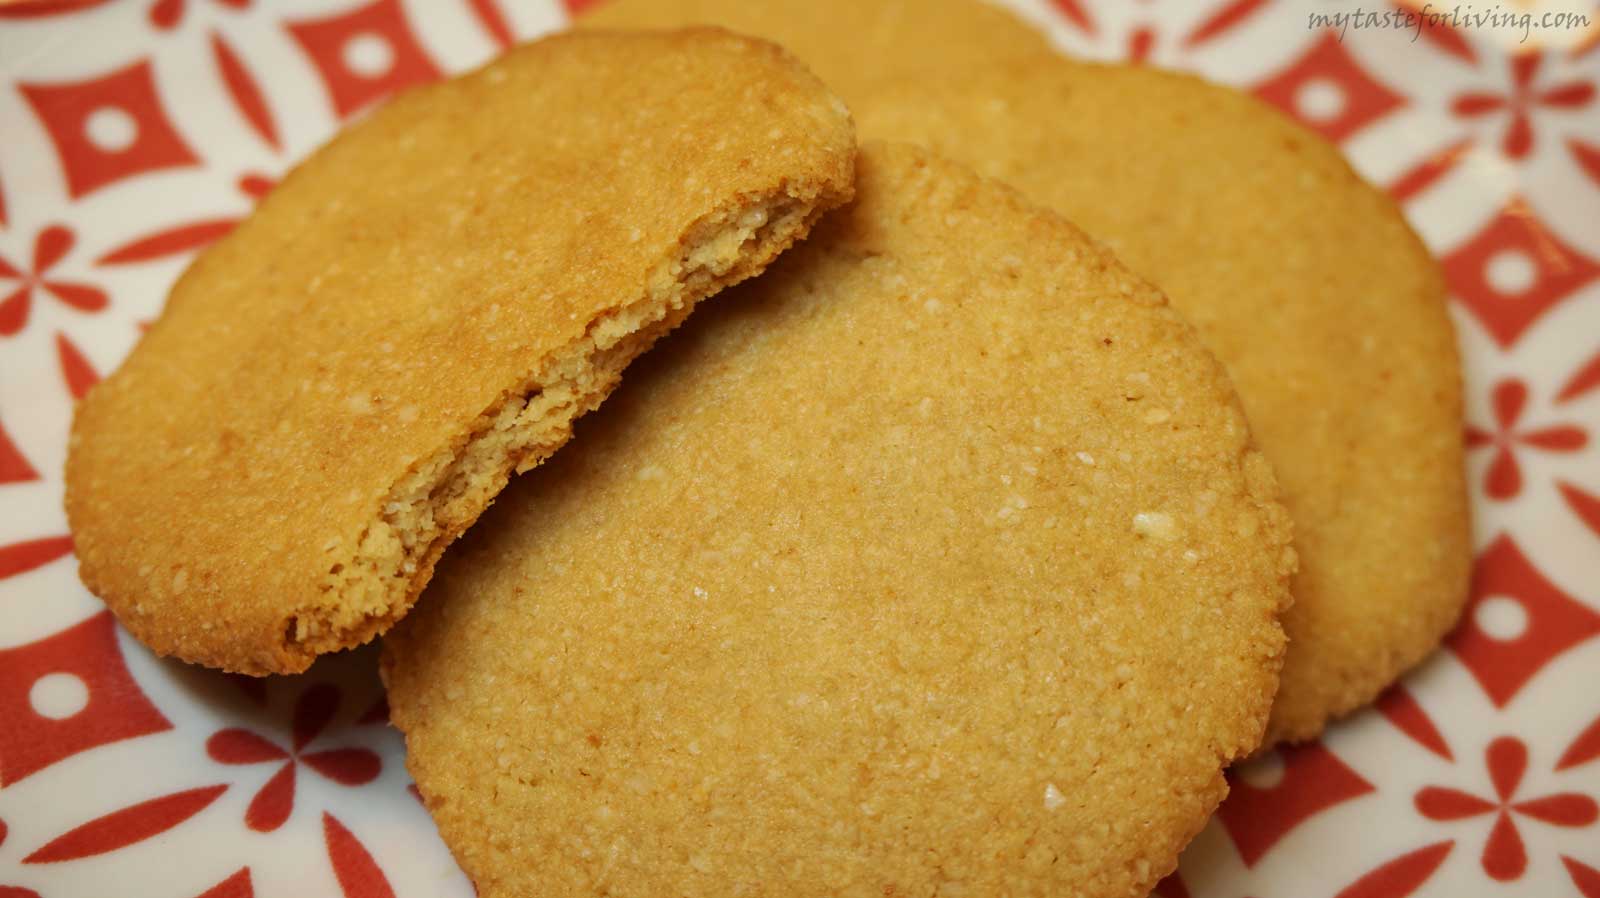 Super-fast almond cookies made from only four ingredients – almond flour, maple syrup or honey, baking powder and vanilla. Gluten-free and suitable for vegans.